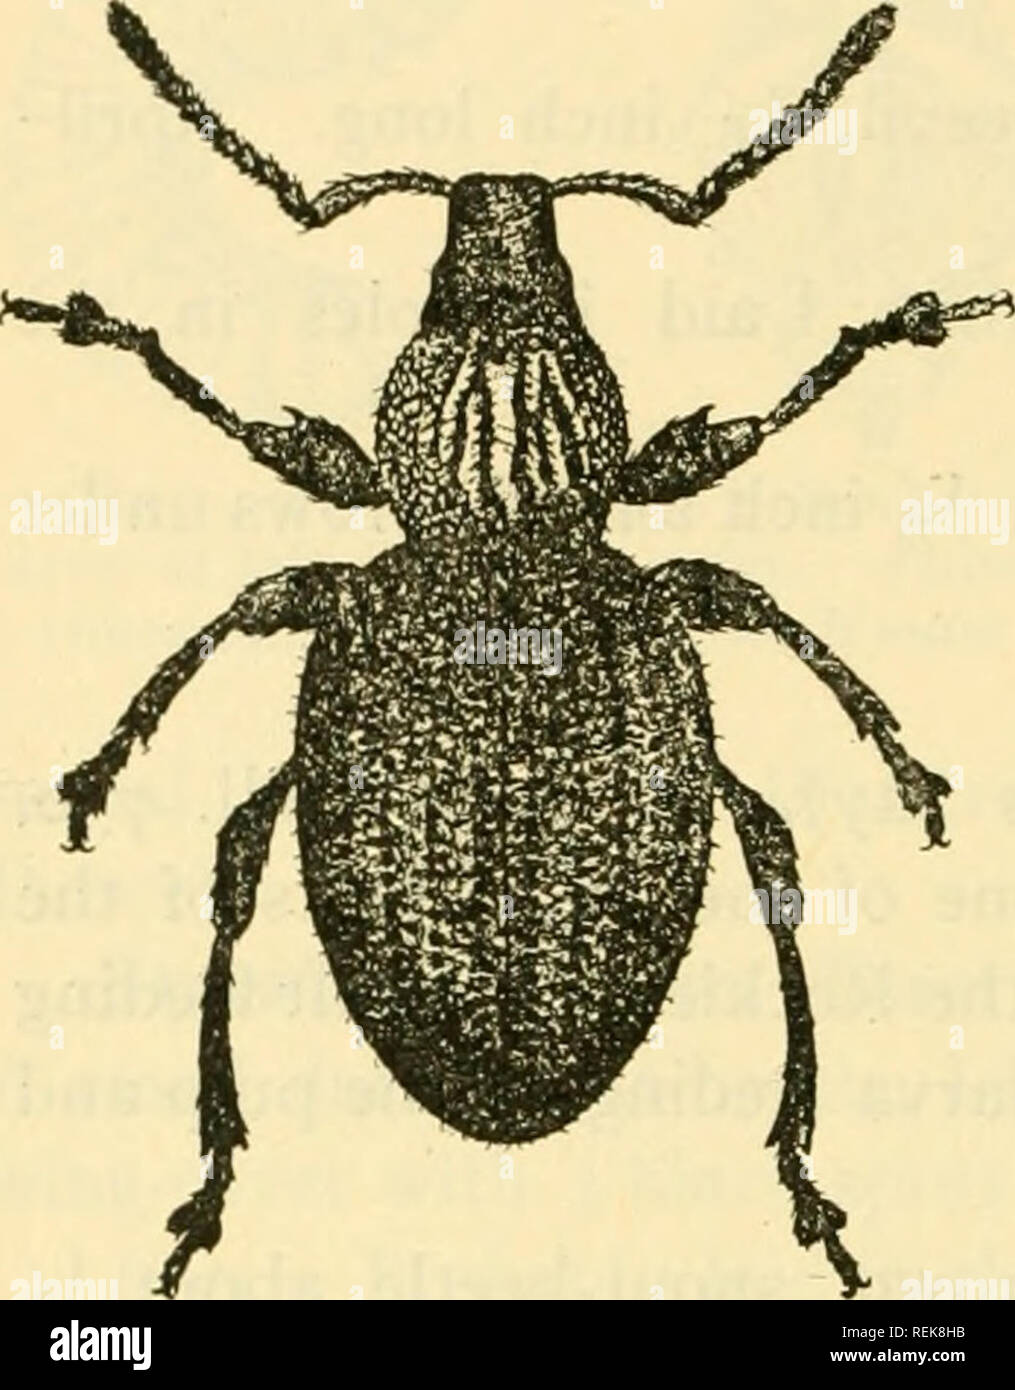 . Class book of economic entomology, with special reference to the economic insects of the northern United States and Canada. Beneficial insects; Insect pests; Insects; Insects. 33^ ECONOMIC ENTOMOLOGY OTIORHYNCHIDiE (SCARRED SNOUT-BEETLES) Strawberry Root Weevil (Otiorhynchus ovatus Linn.).—Adult. A small brownish-black snout-beetle; 3-^ inch long. June and August- September (Fig. 217). Eggs.—Female lays about 50 eggs in 4 to 15 days in the soil. Hatch in 21 days. End of June to end of August.. Please note that these images are extracted from scanned page images that may have been digitally e Stock Photo